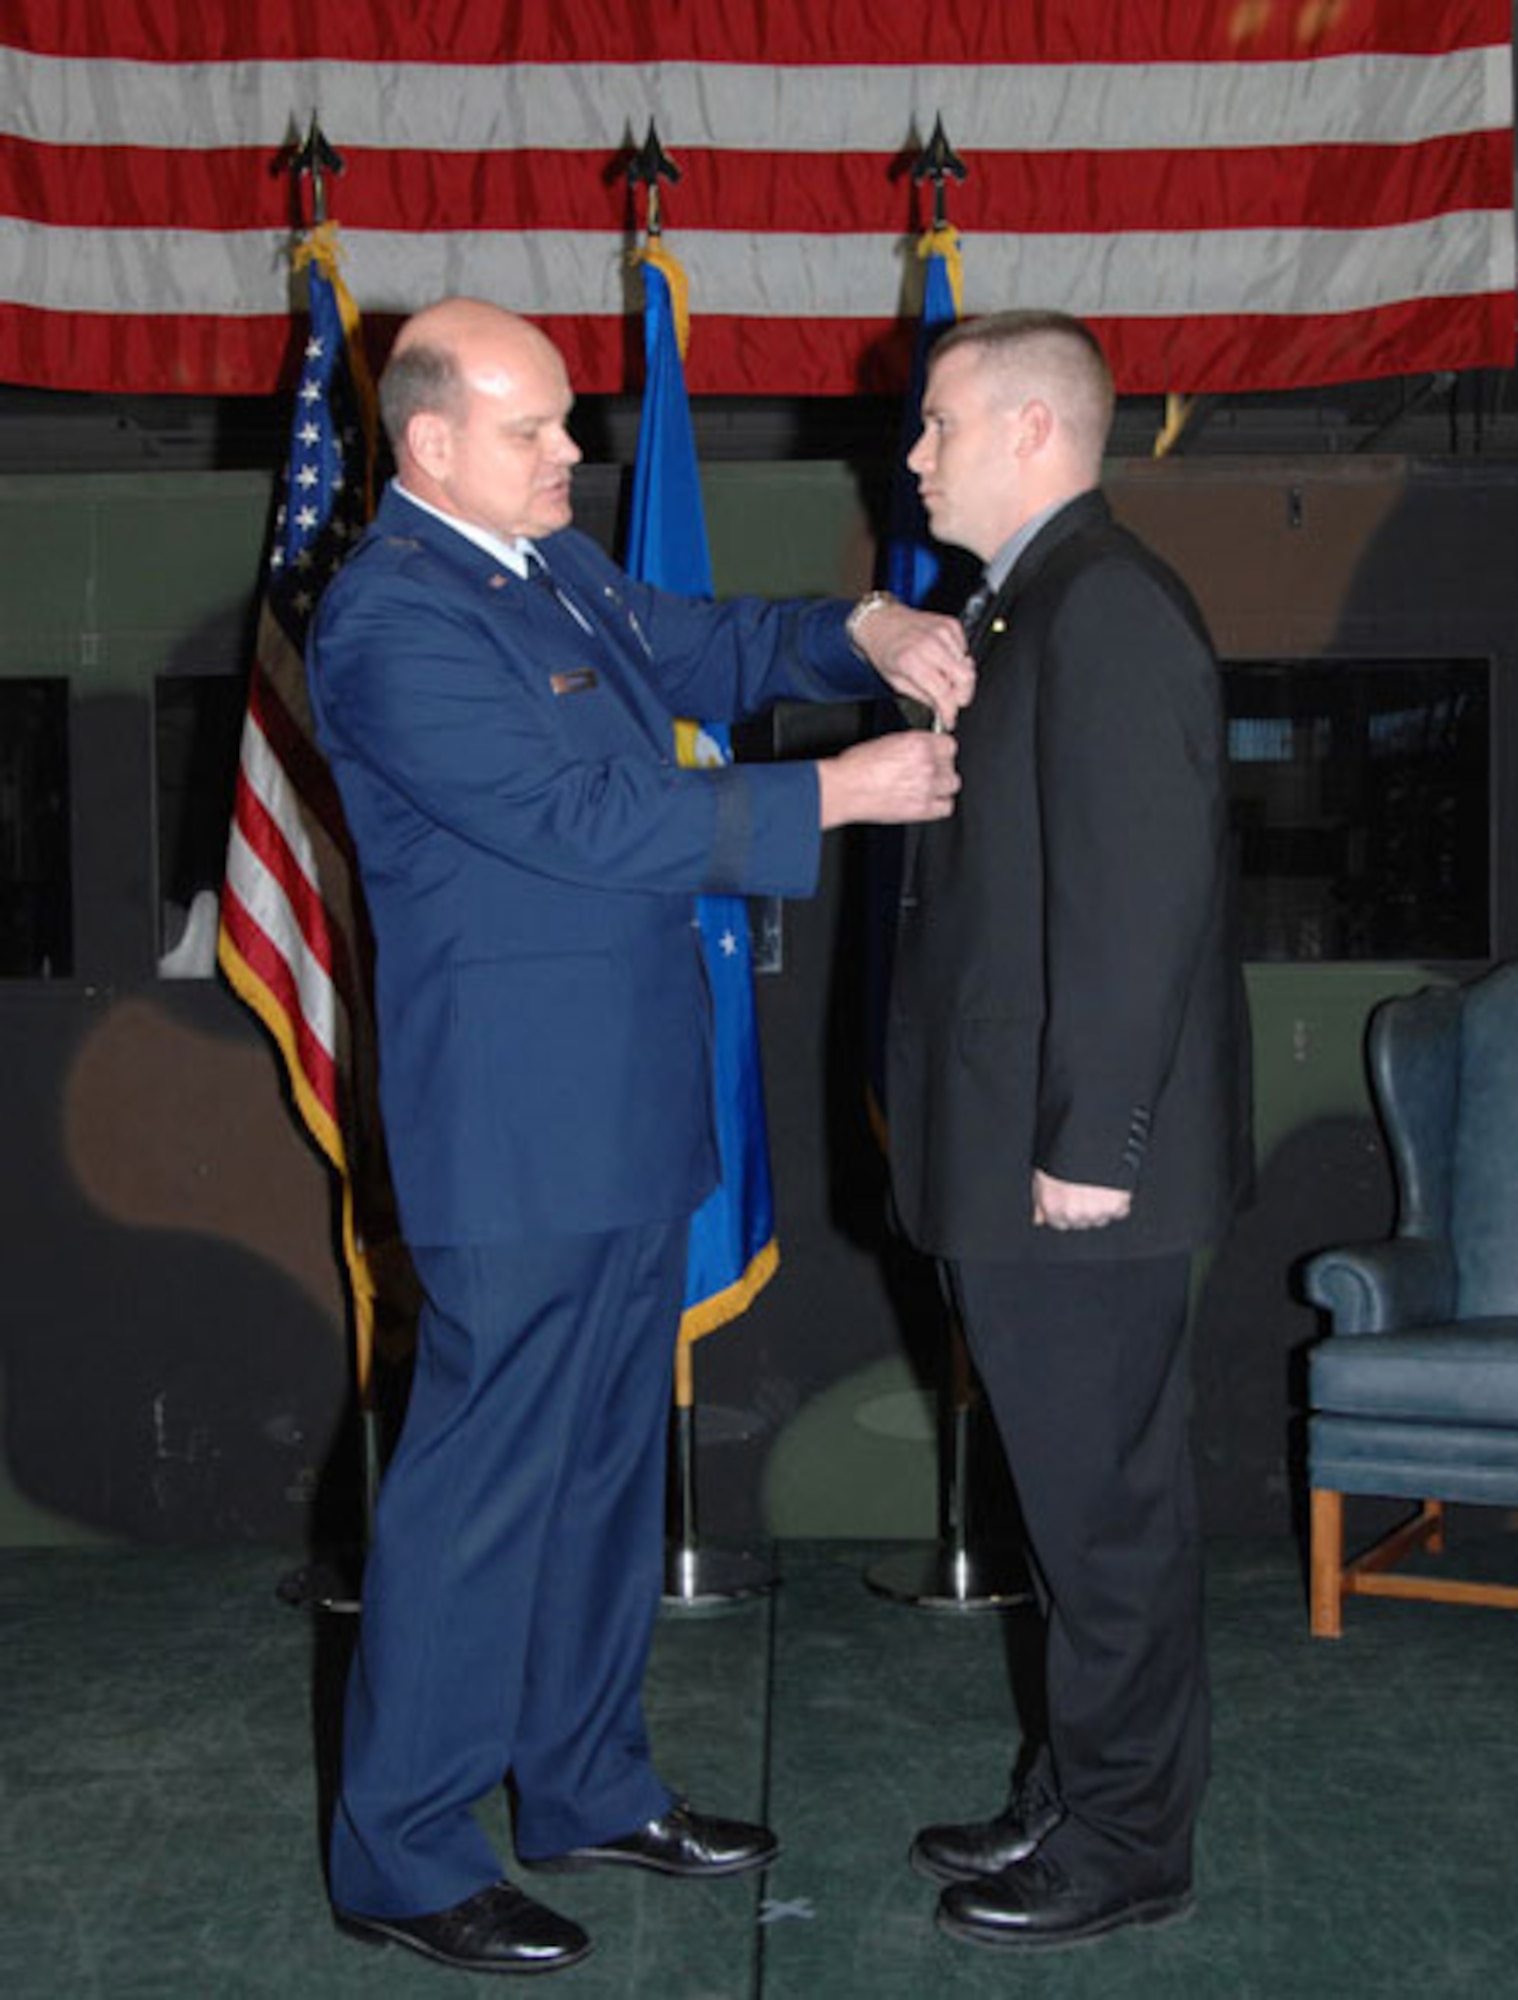 Air Force Office of Special Investigations Special Agent James Collins receives the Airman's Medal for rescuing troops in Iraq after a helicopter crashed into a lake. Special Agent Collins is credited with assisting in the rescue and life-saving efforts of 10 of the 14 passengers and crew. He also received the Bronze Start and Air Force Combat Action Medal for his efforts in accomplishing the mission in Iraq. (U.S. Air Force photo)